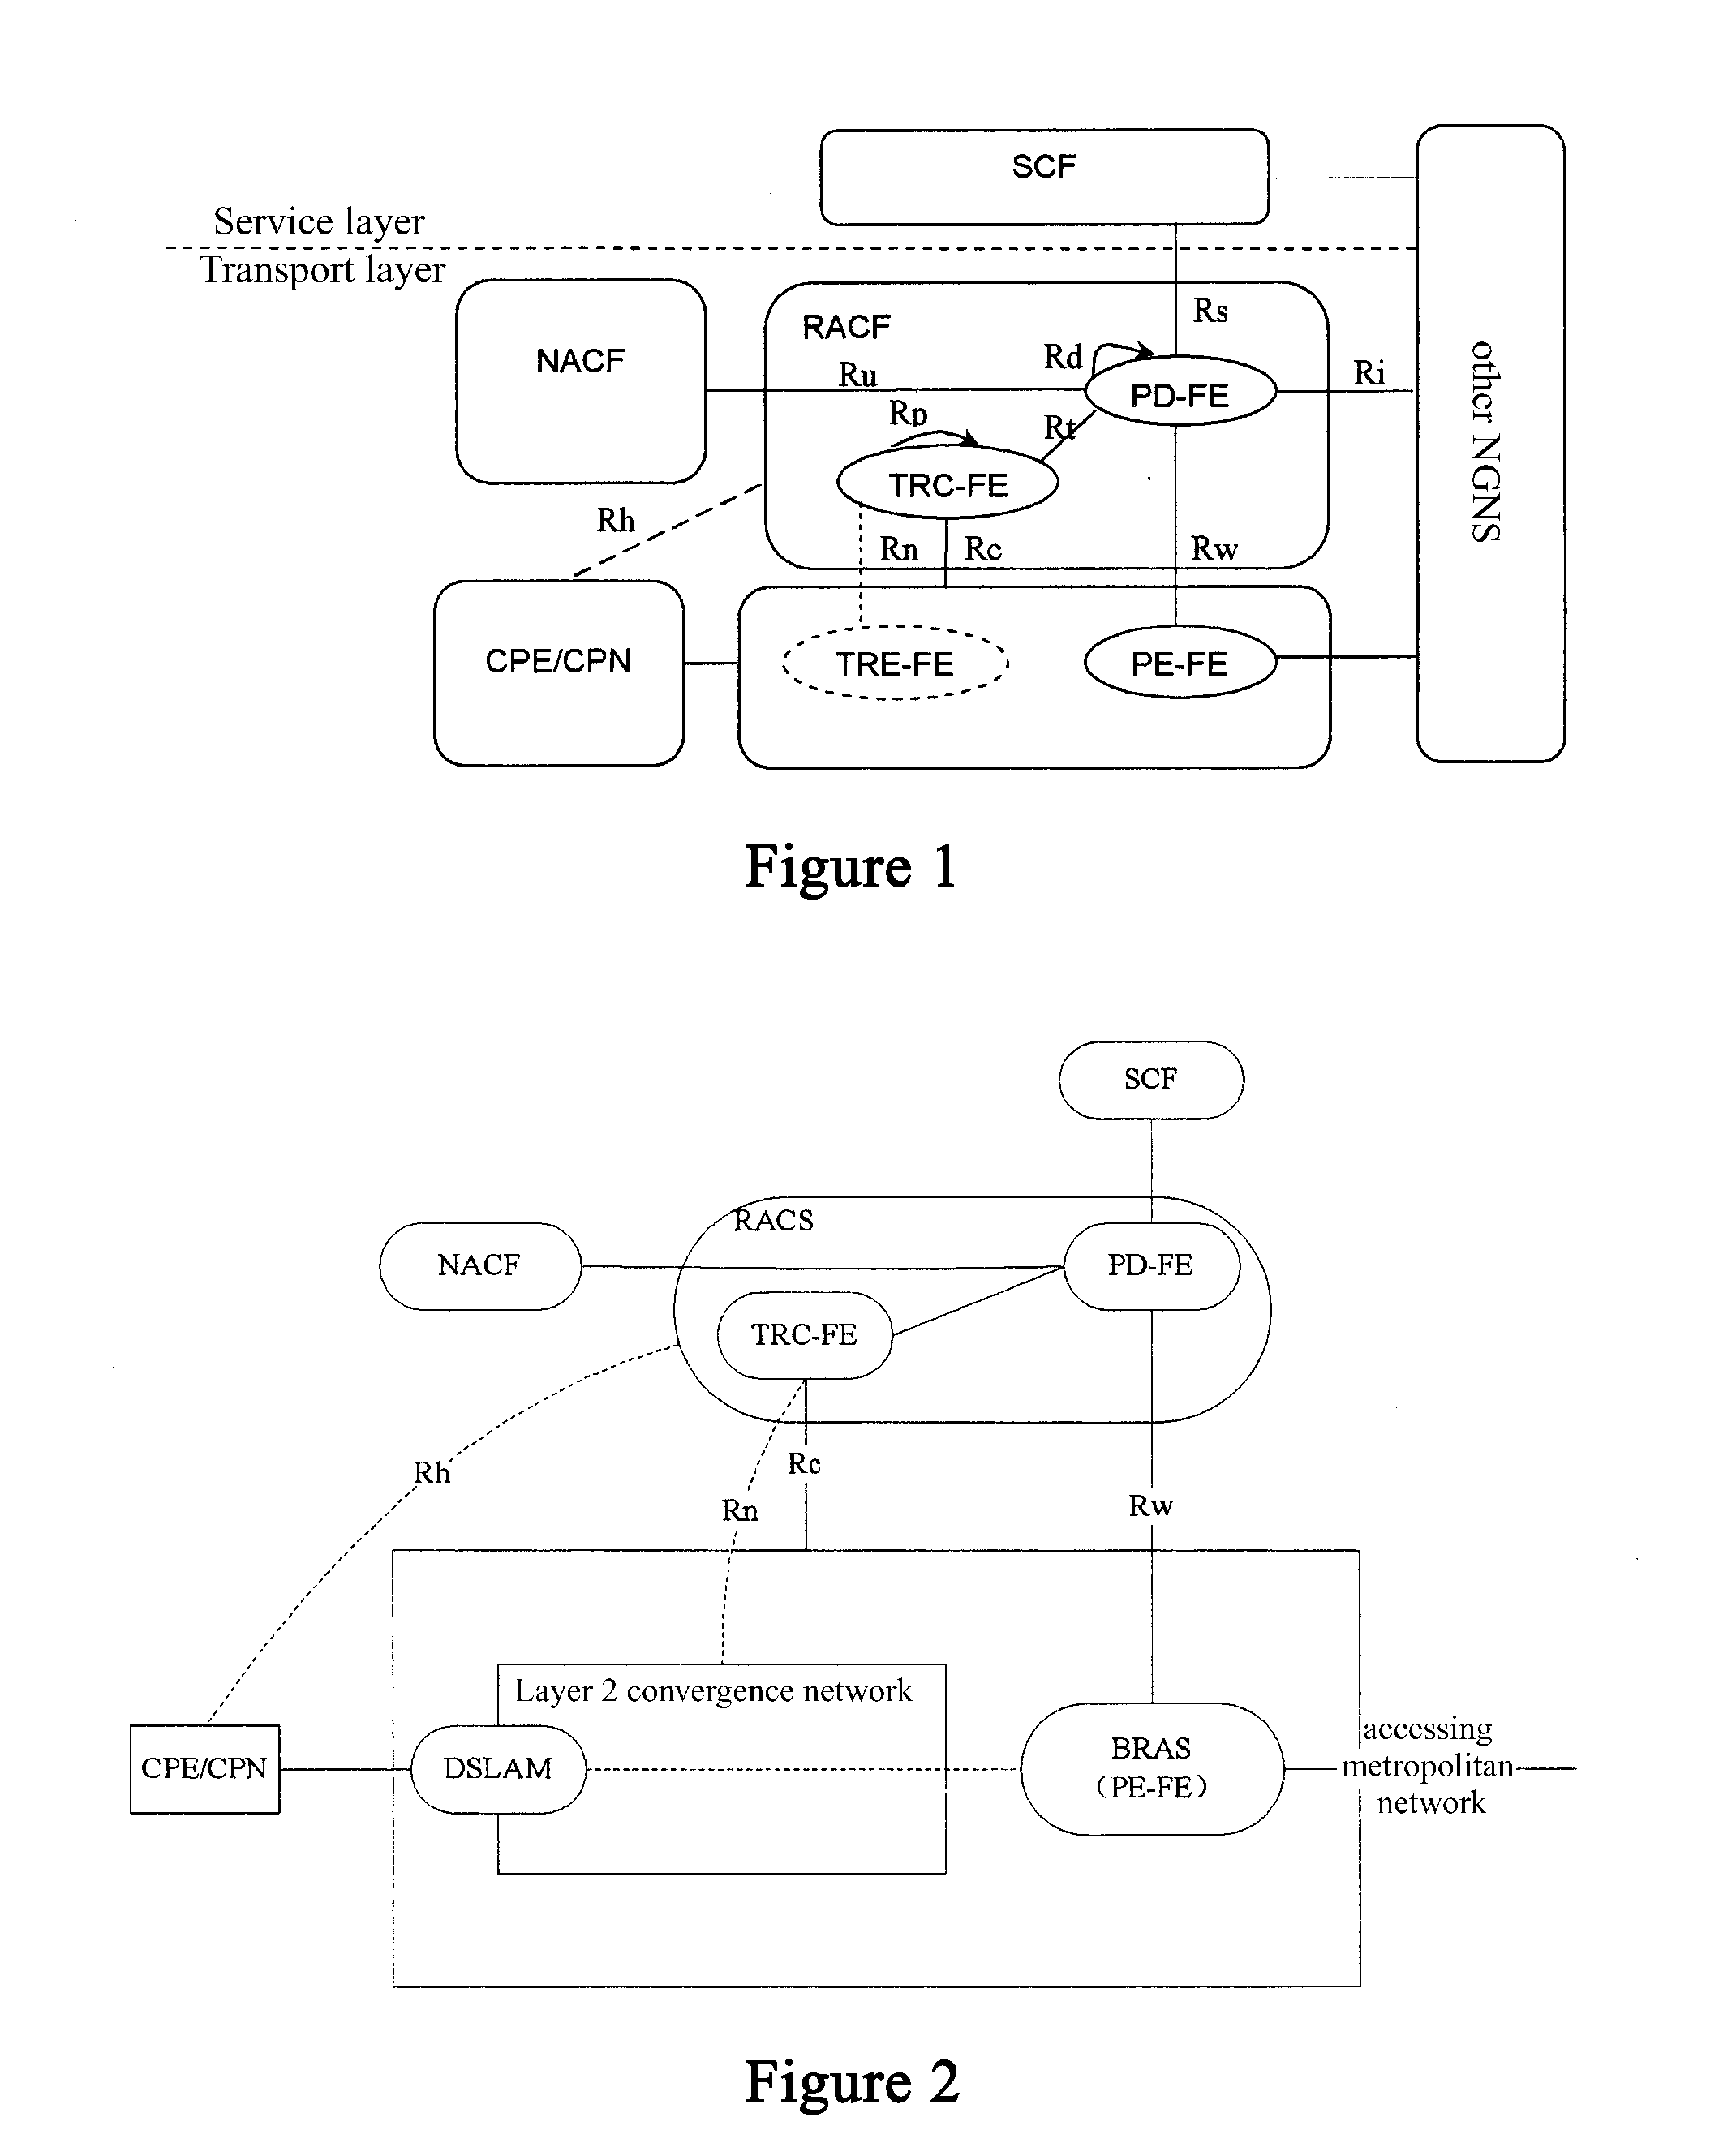 Method and system for controlling home gateway policy